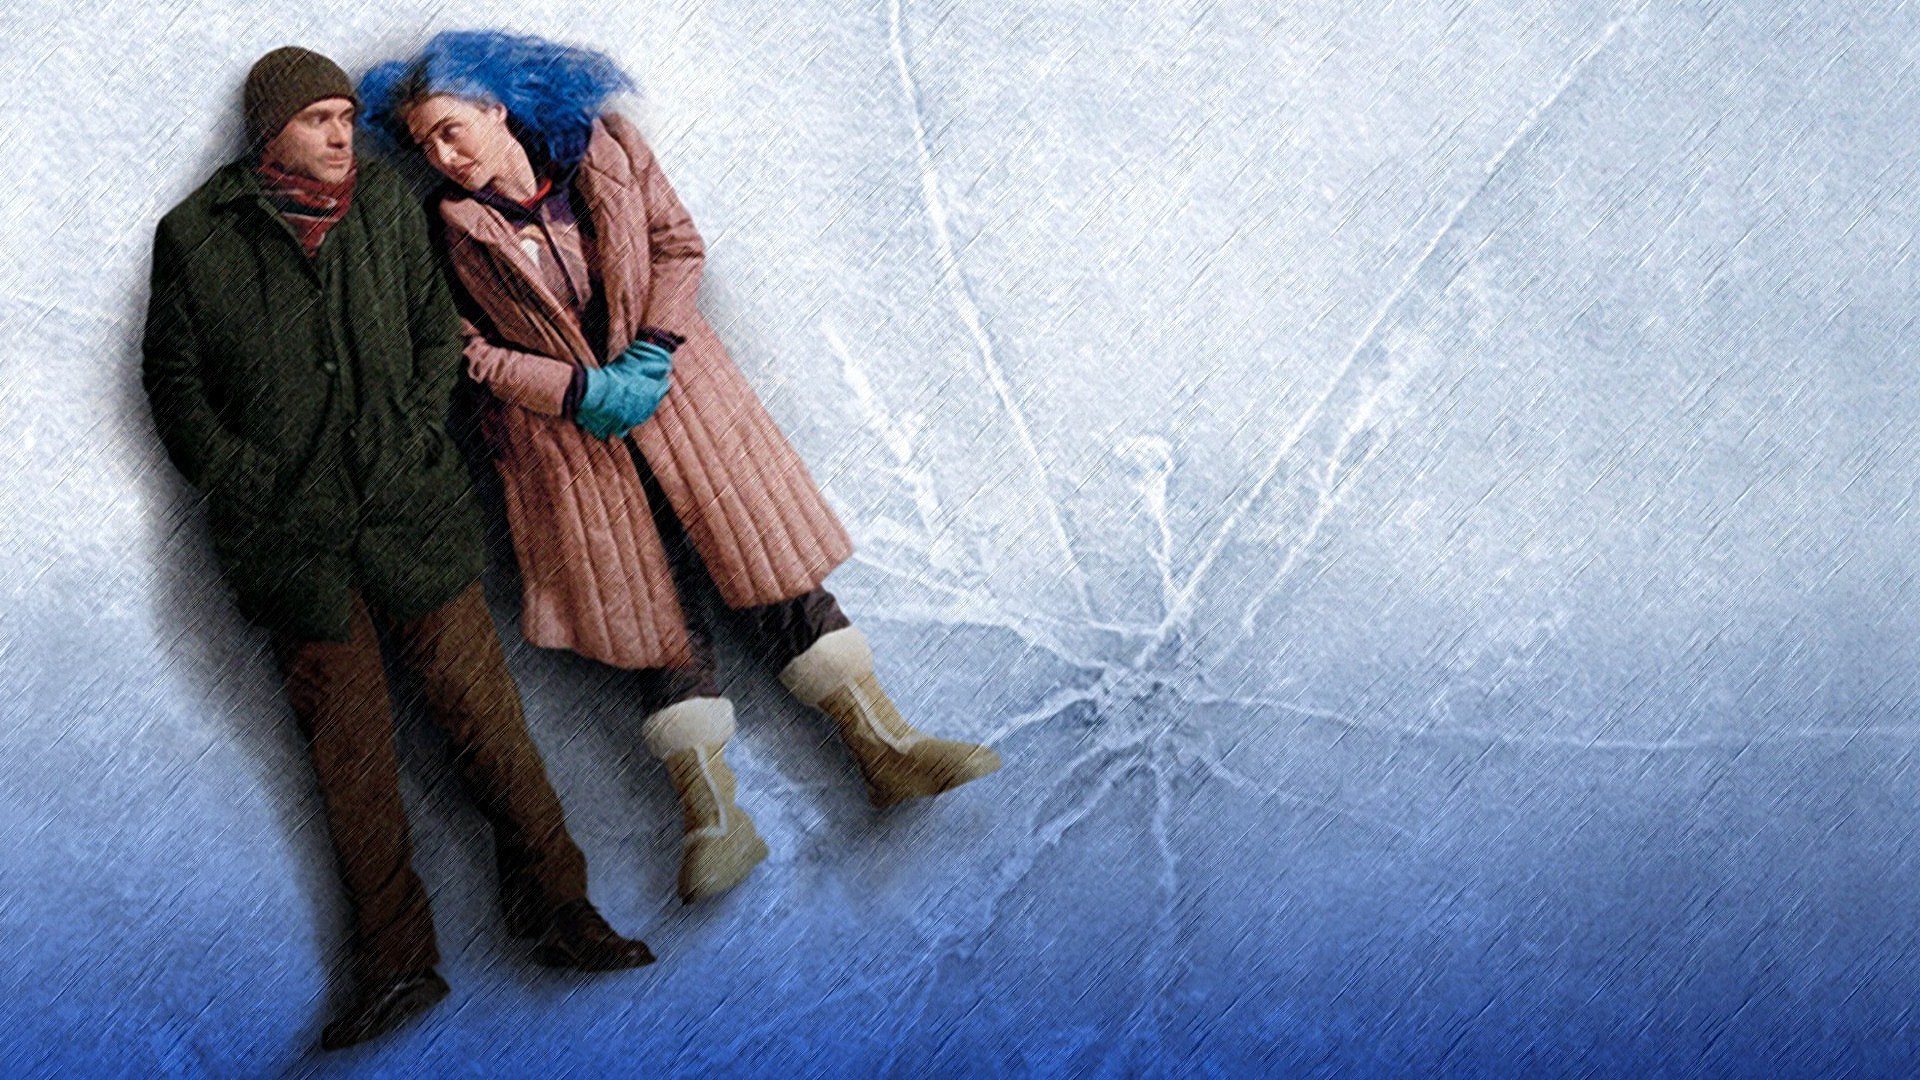 Images of Eternal Sunshine Of The Spotless Mind | 1920x1080